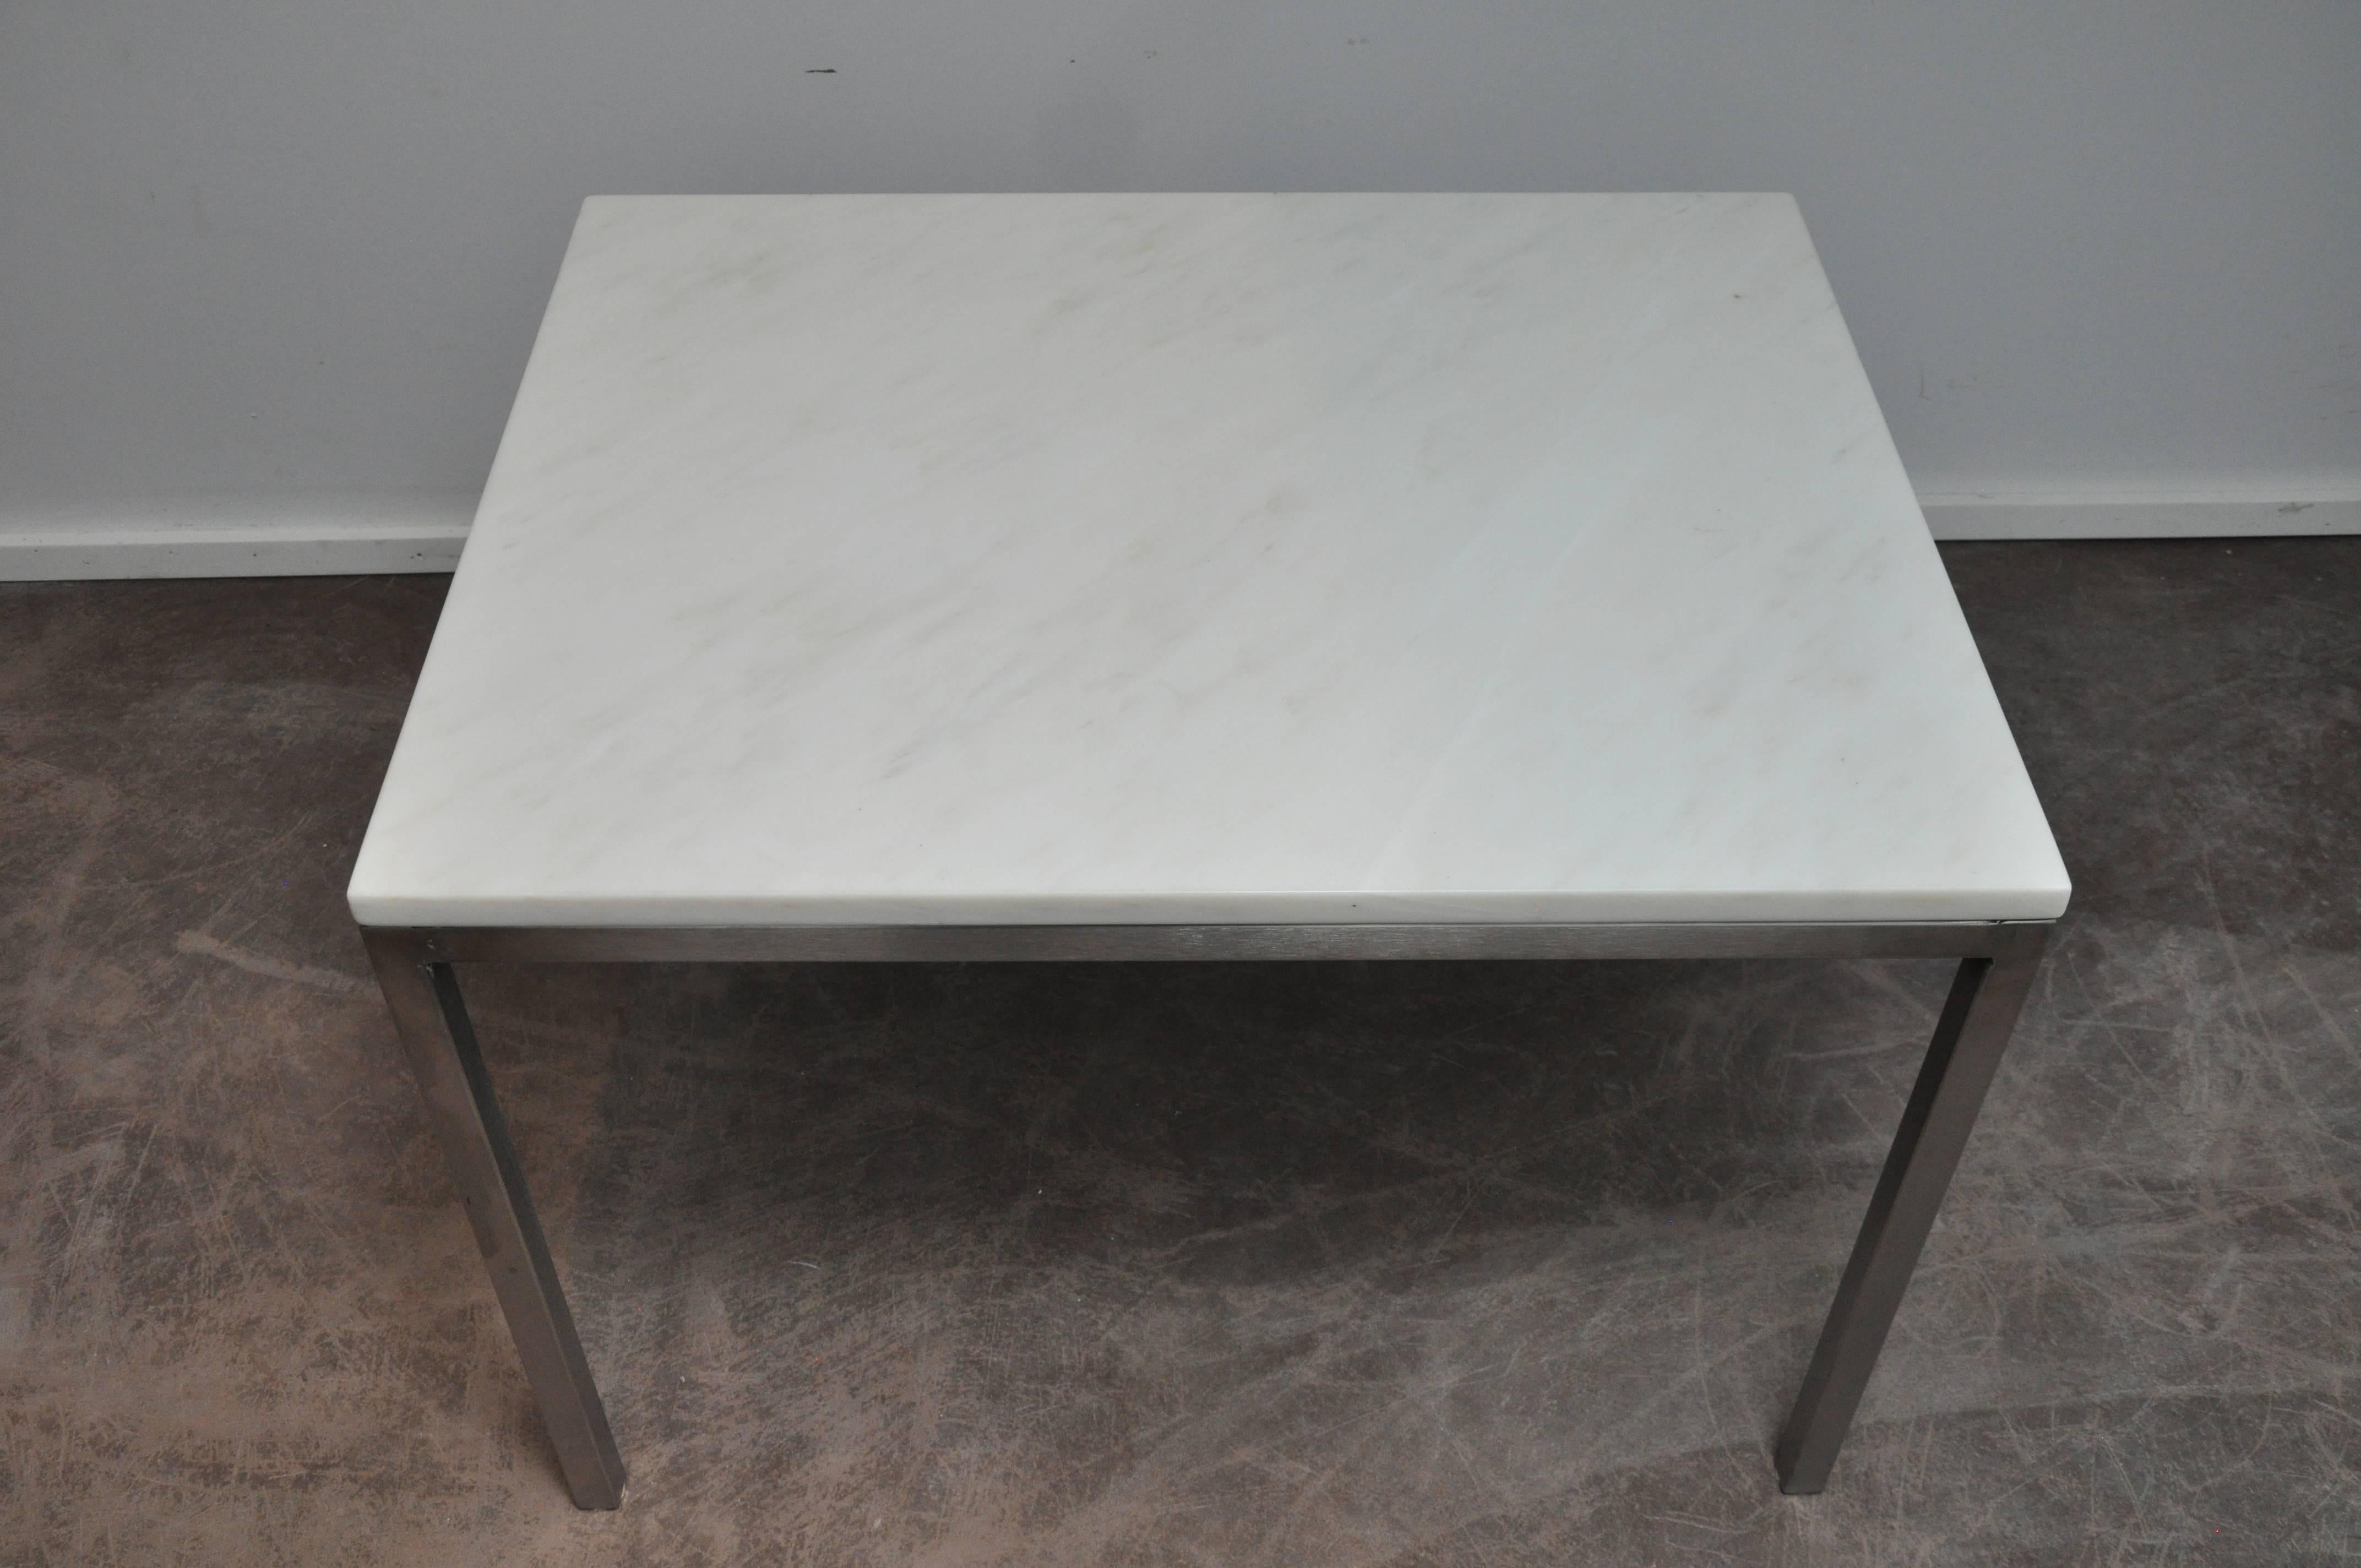 Mid-20th century marble and chrome side table, circa 1960s. Honed marble-top has light grey veining and the tubular chrome legs are in a satin finish. 

Dimensions: 30" W x 24" D x 21" H.

